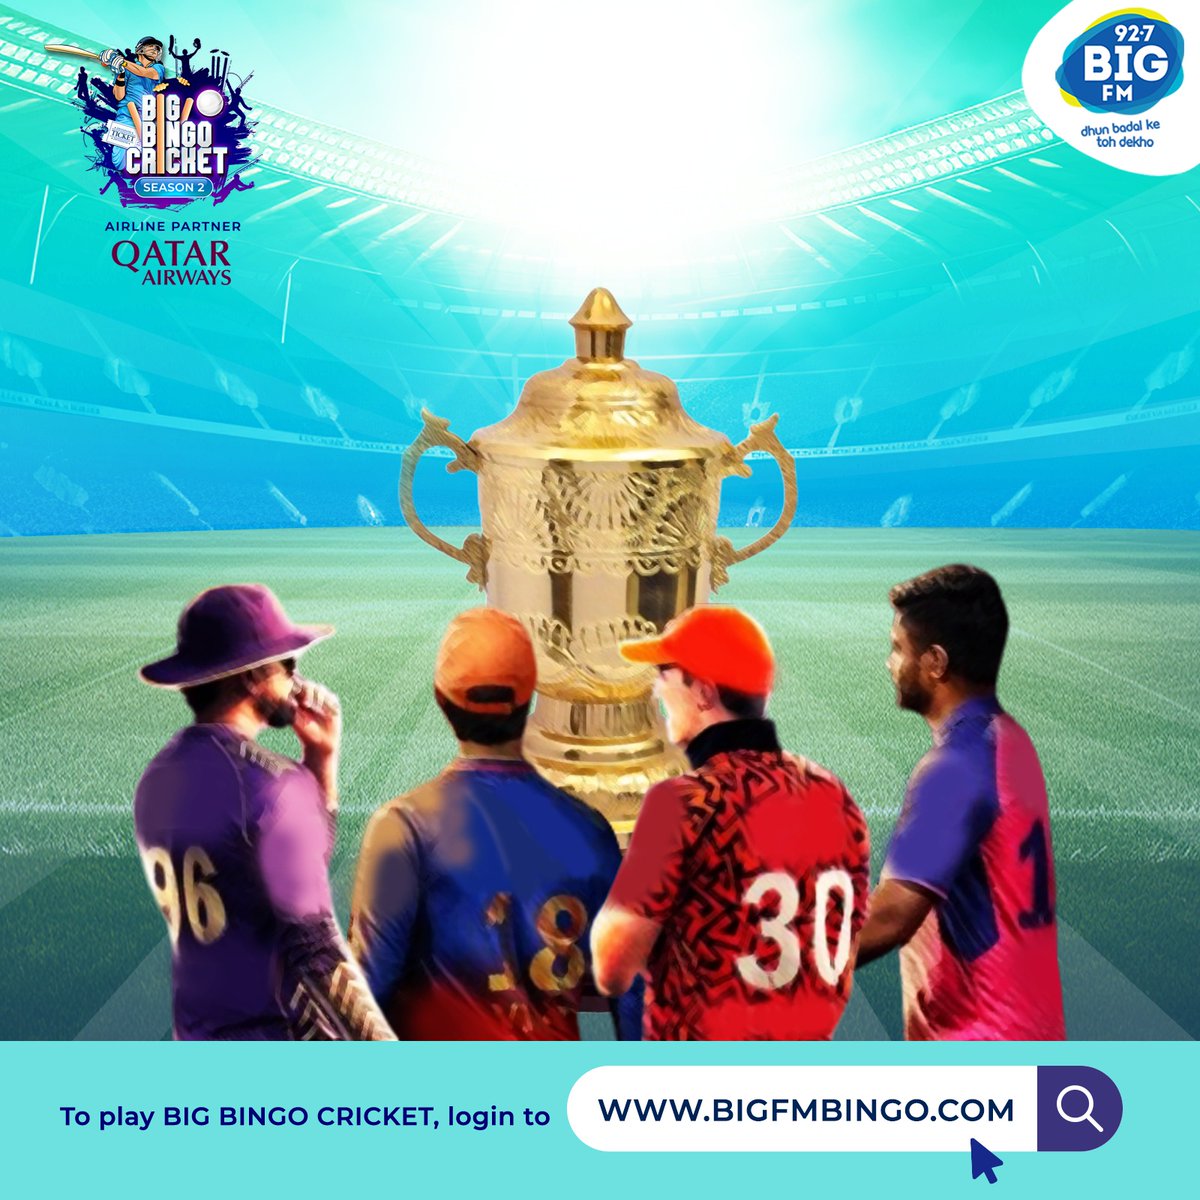 The stage is set 😎 The #TopFour are ready to clash for the ultimate prize. Register and login on bigfmbingo.com to start playing NOW 🏏 Airline Partner: @qatarairways #BIGFM #DhunBadalKeTohDekho #BIGBingoCricket #IrfanPathan #Cricket #Sports